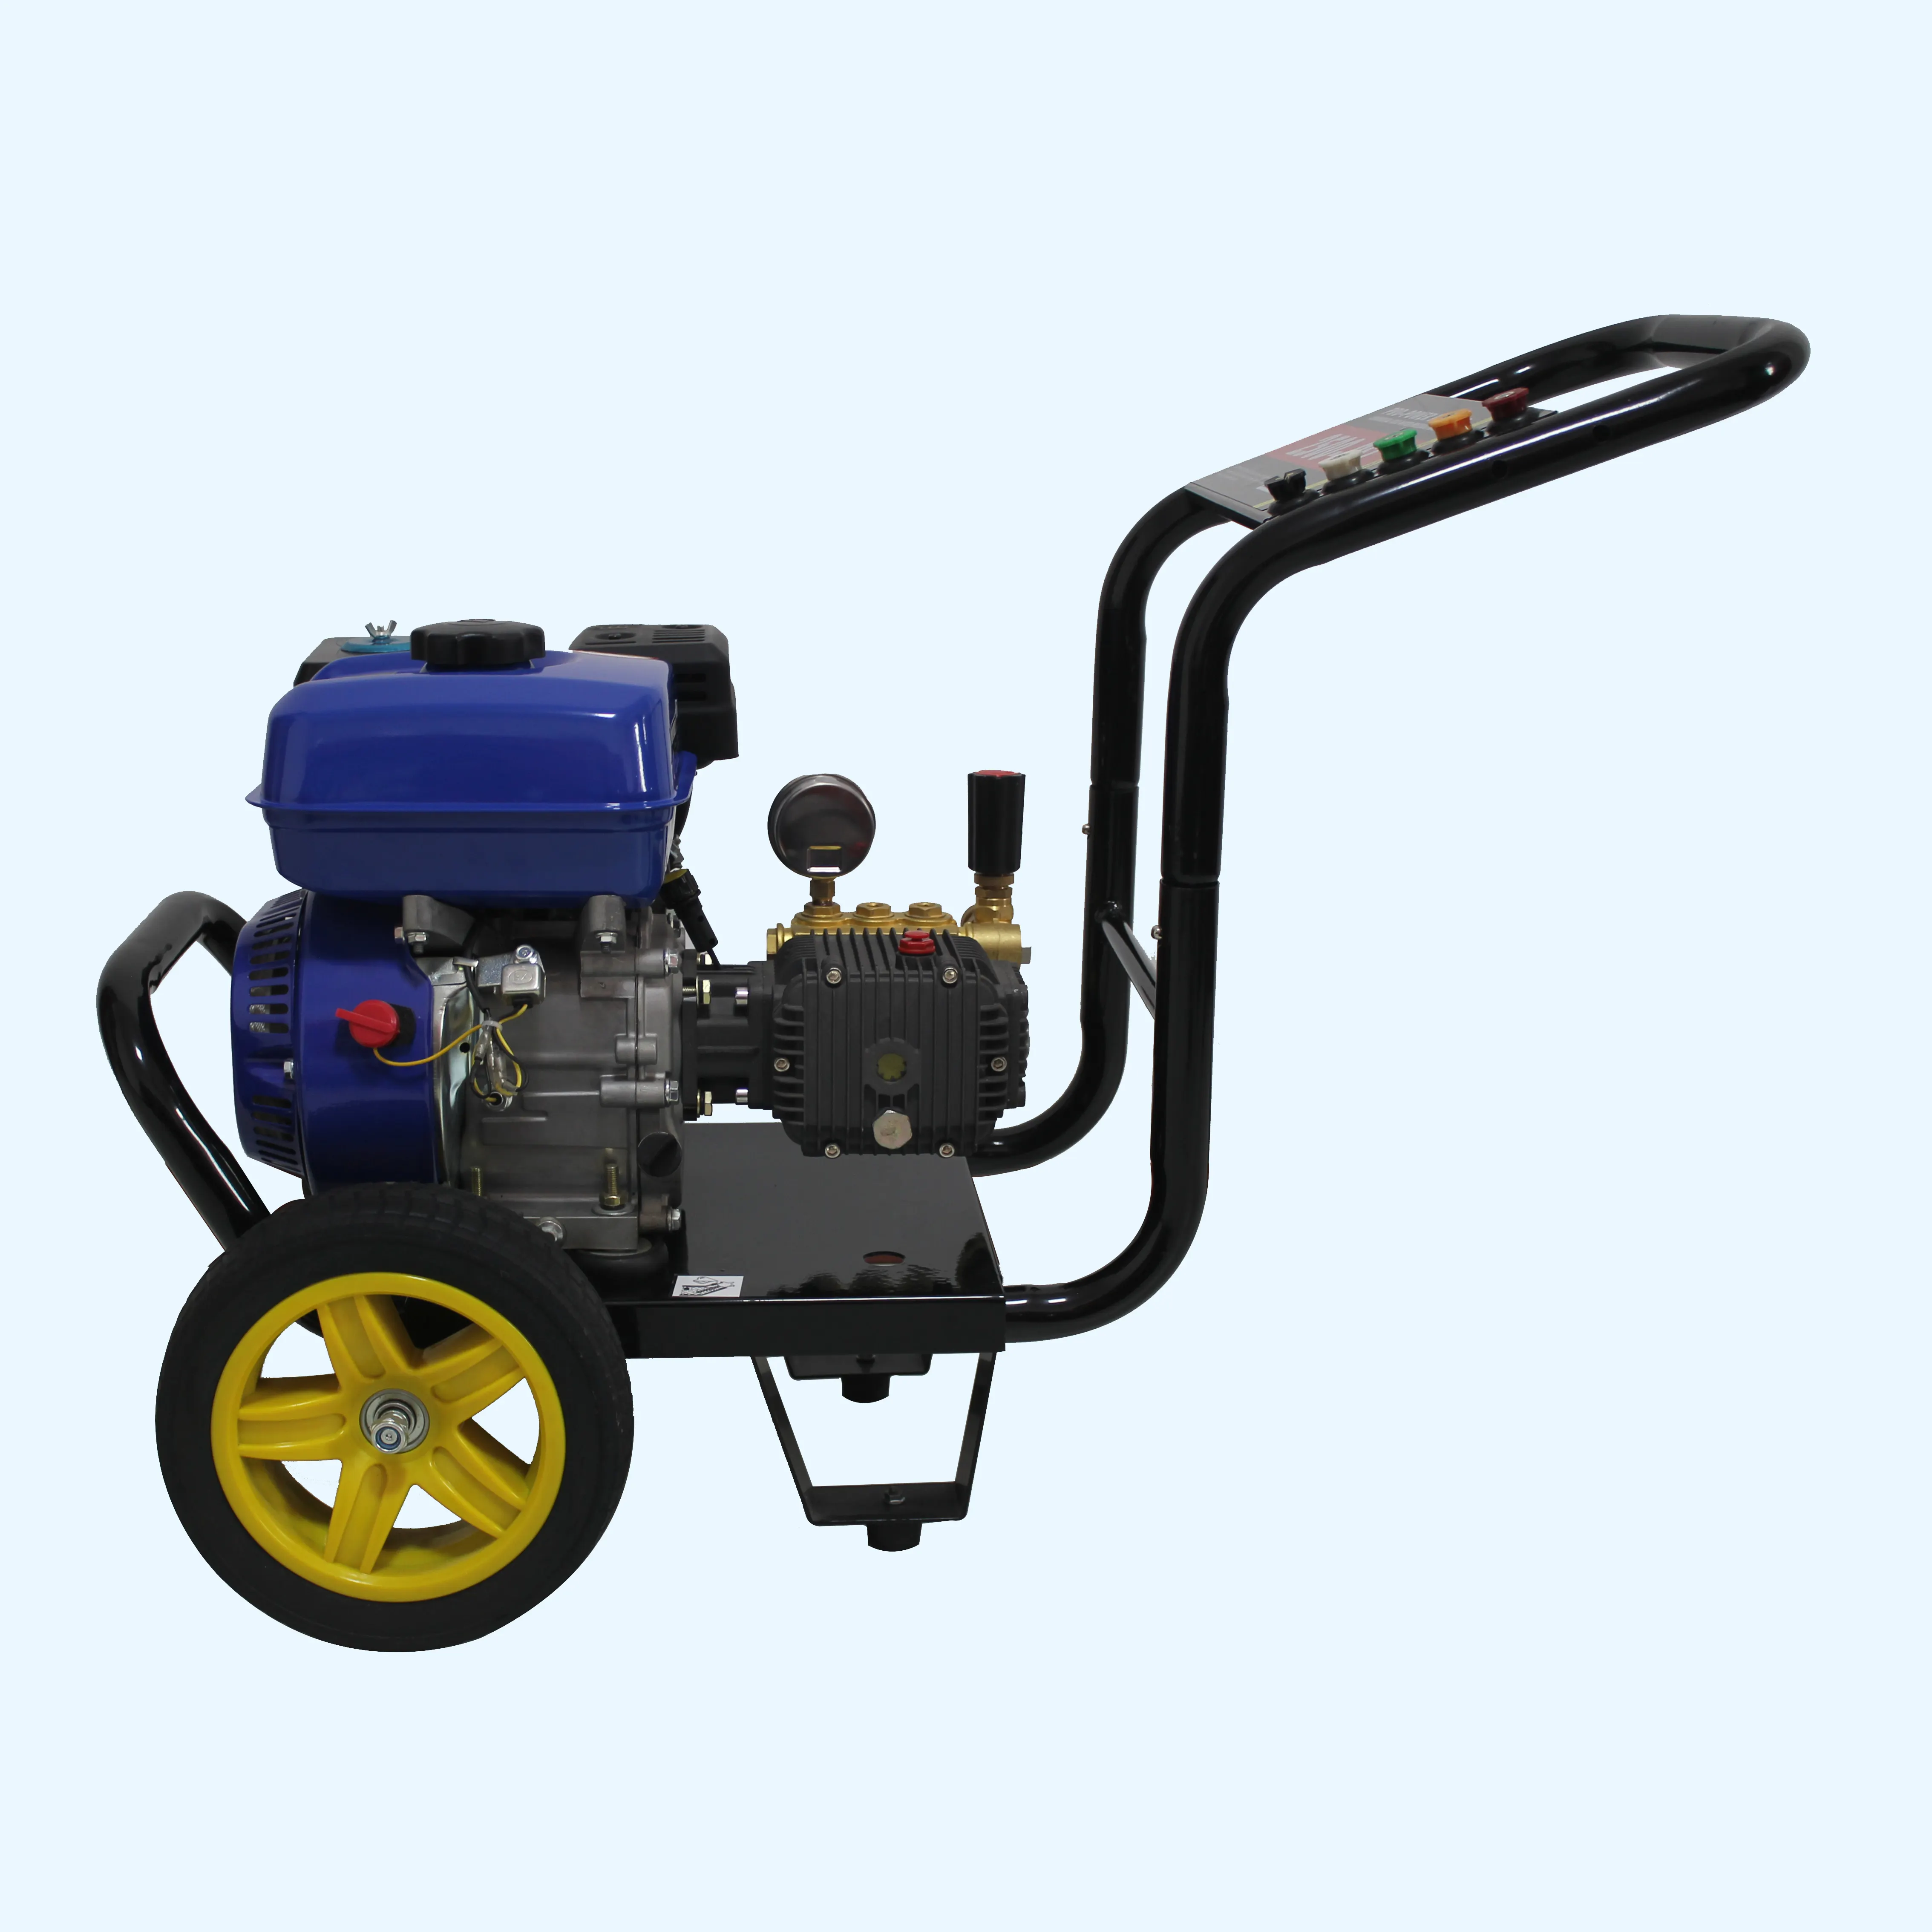 WDPW270 6.5 HP Cleaning Equipment Home Use High Pressure power Washer pumpe Cleaner